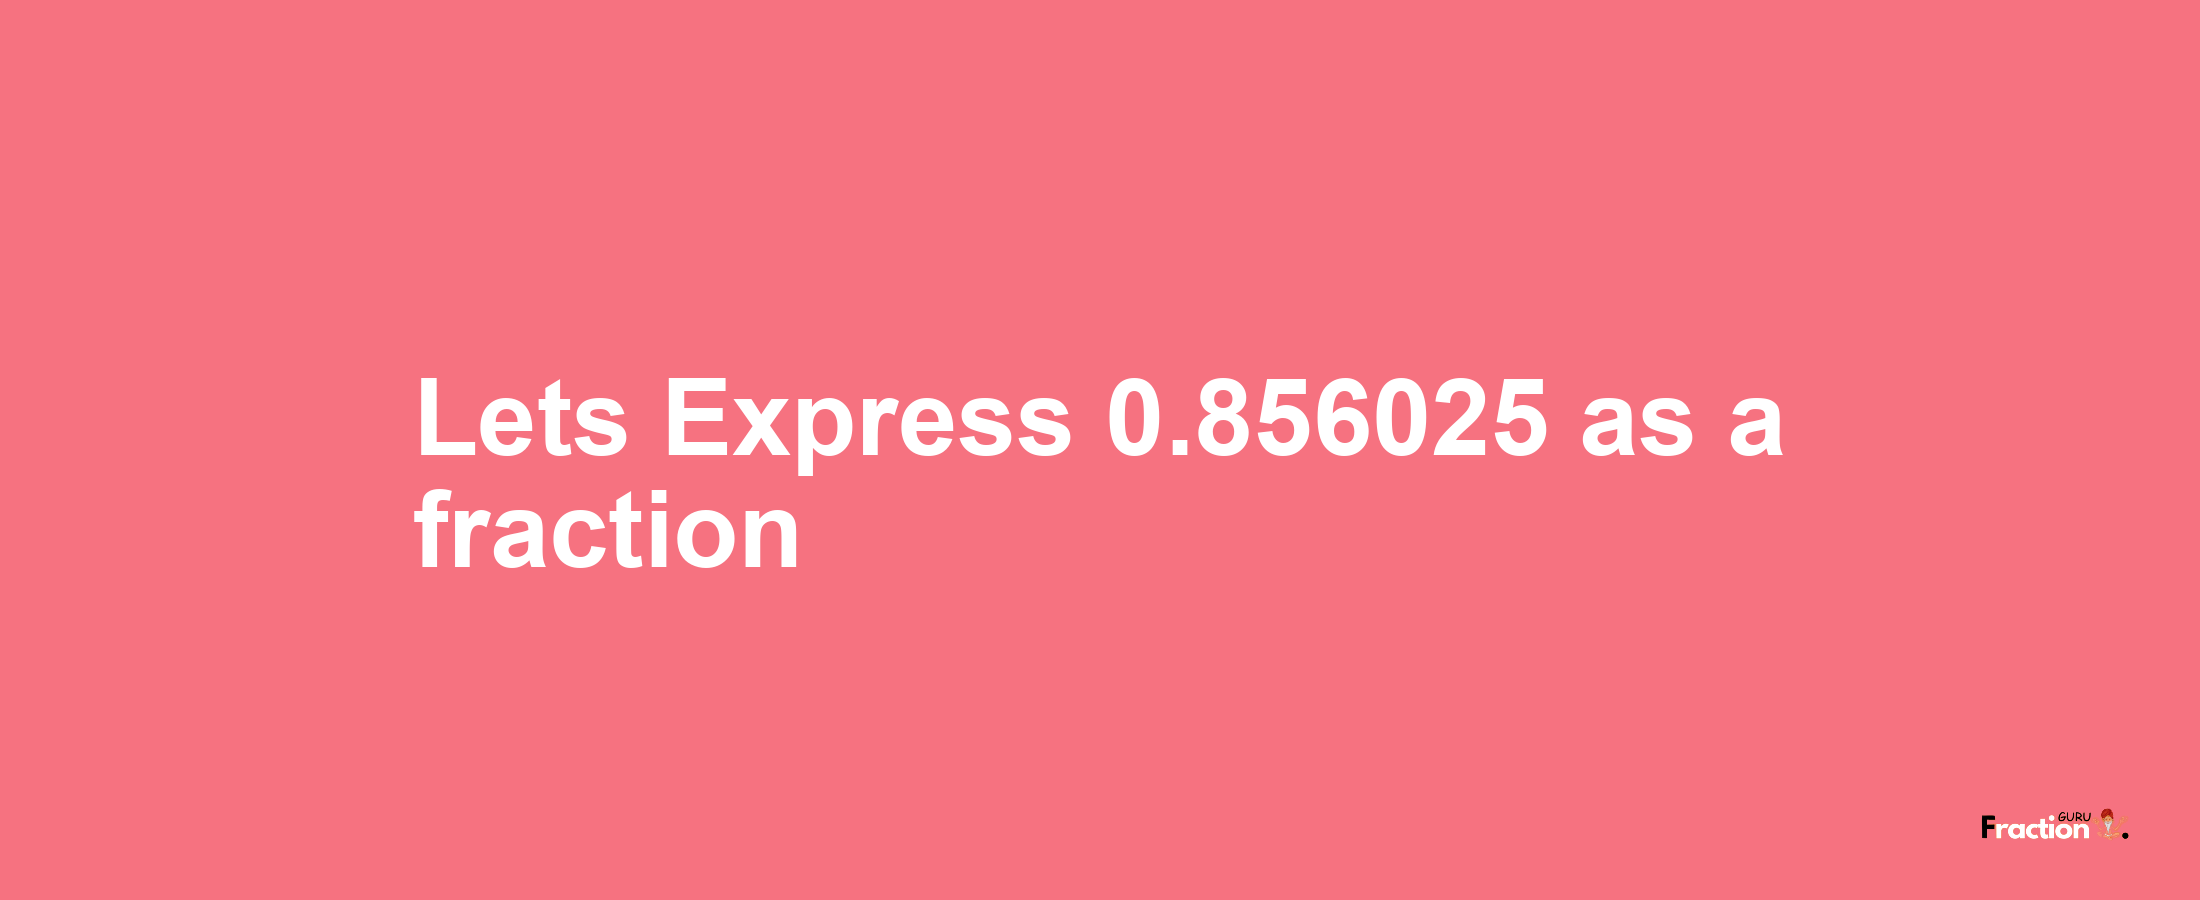 Lets Express 0.856025 as afraction